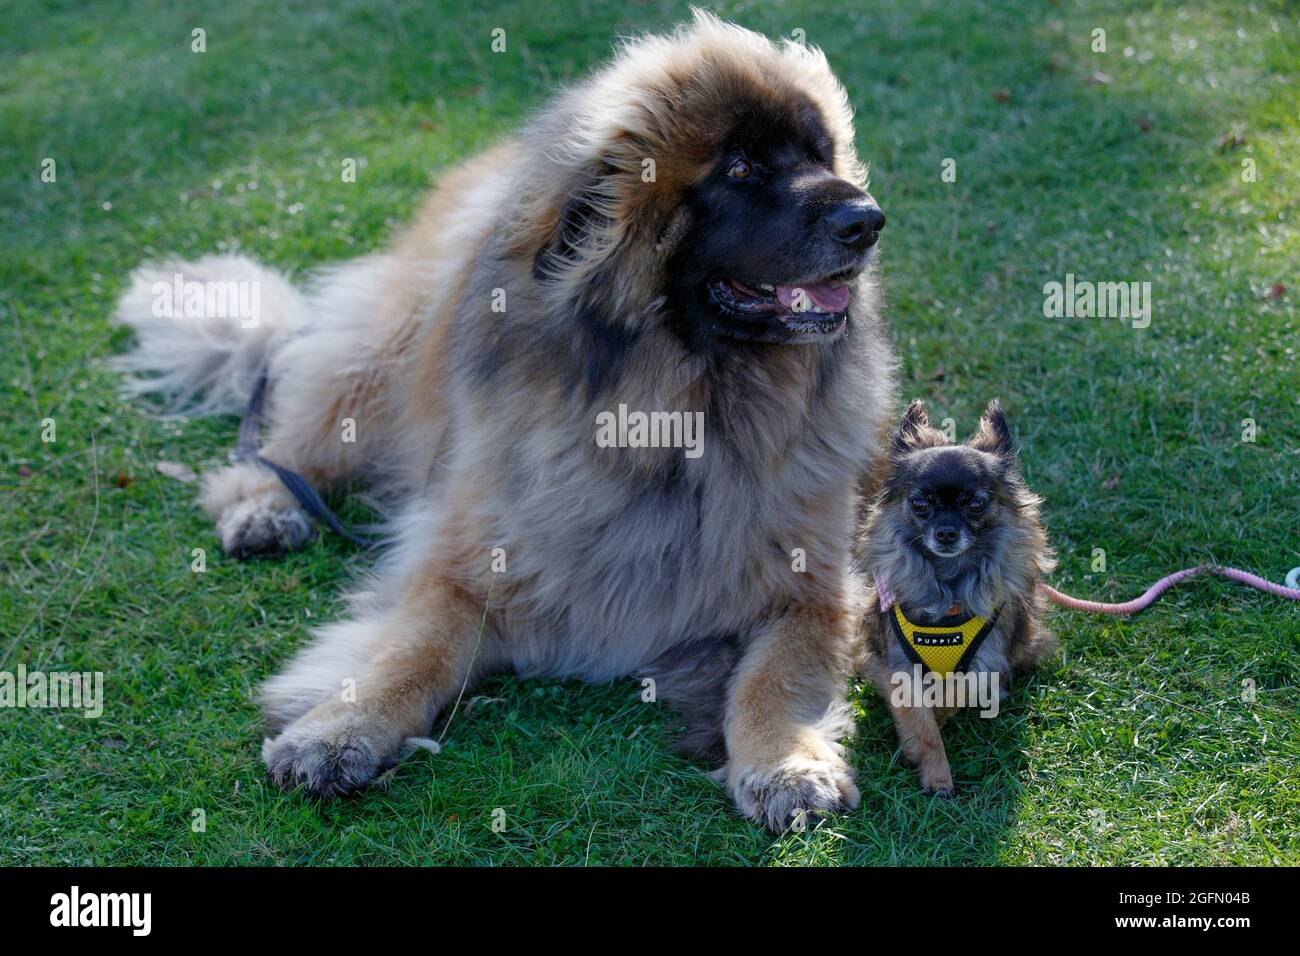 'George and Teddy' a Leonberger and a short haired chihuahua sit together at Dogstival, a festival for dogs and dog lovers at  Burley Park, in the New Stock Photo